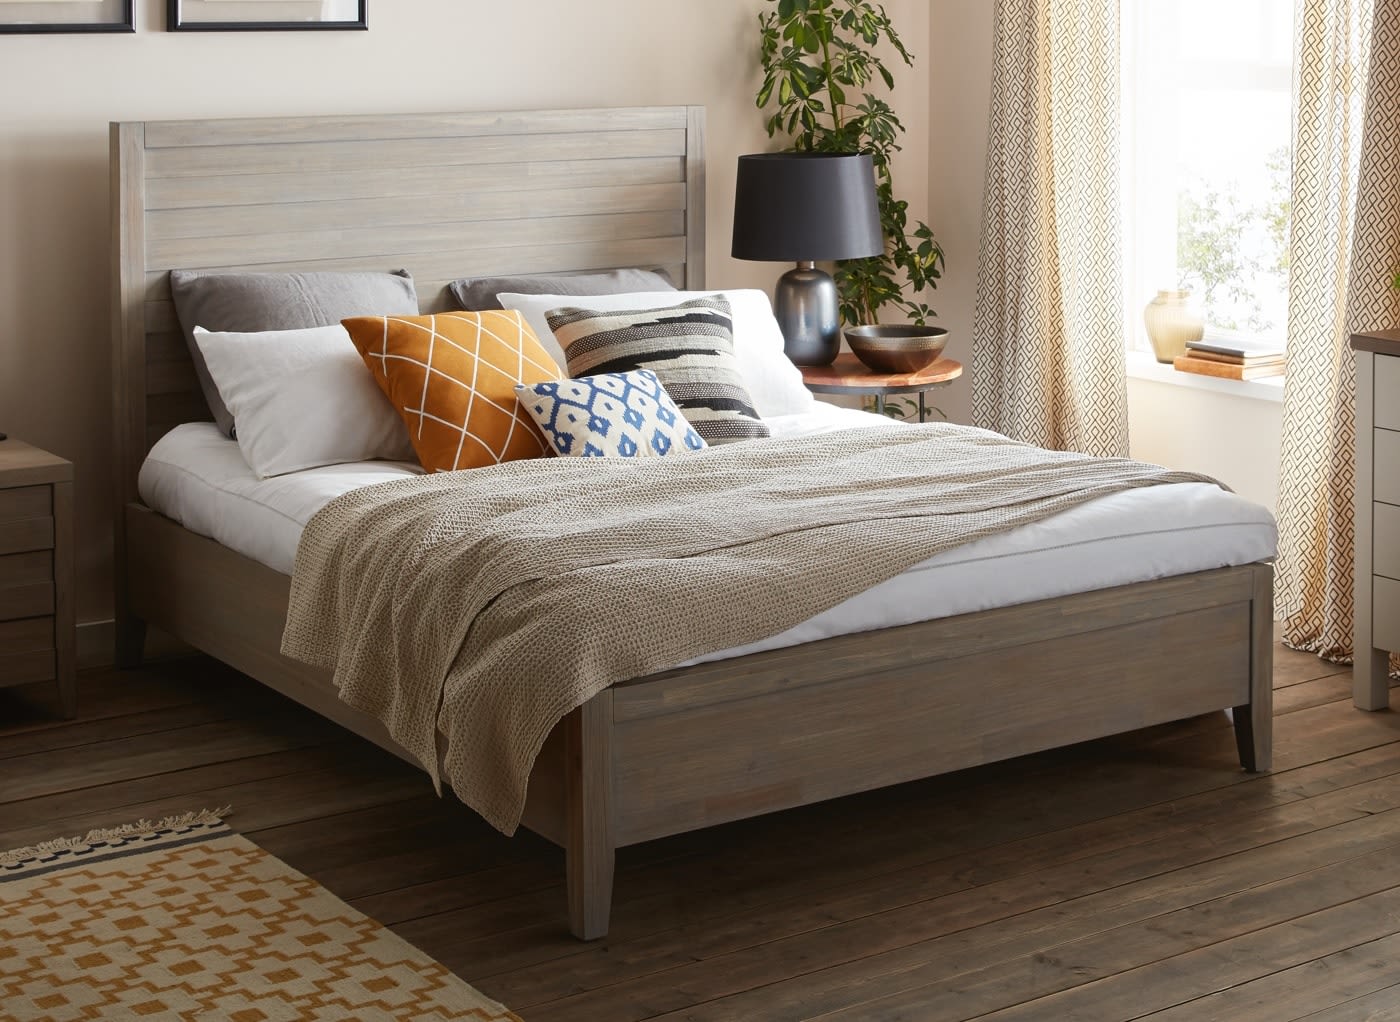 Burke Grey Wooden Double Bed Frame 46 Double Light Wood Bed Sava With Emma 7732